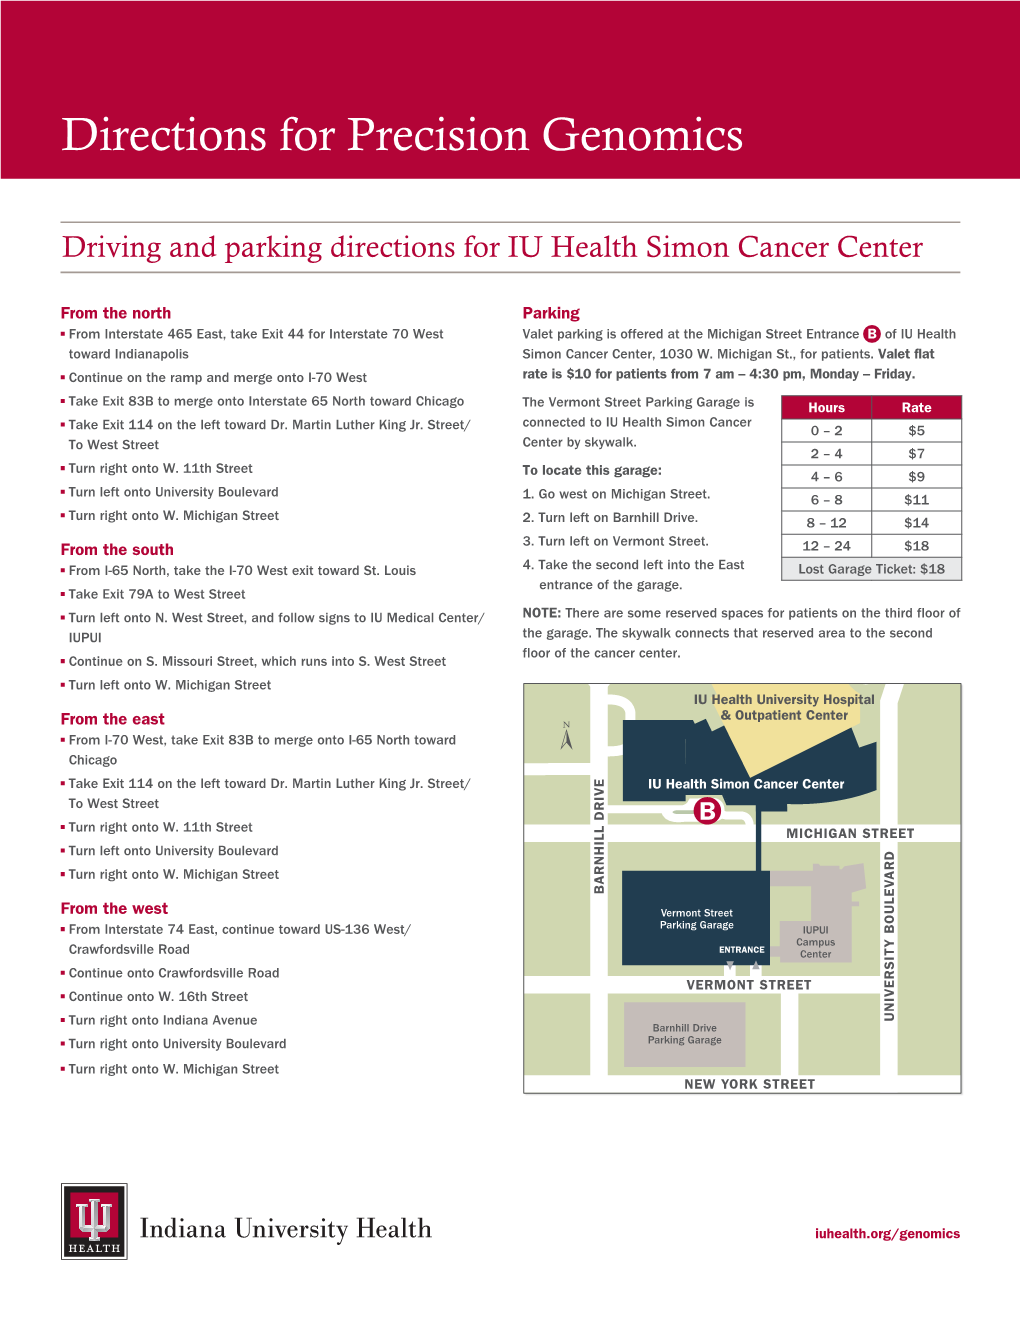 Driving and Parking Directions for IU Health Simon Cancer Center